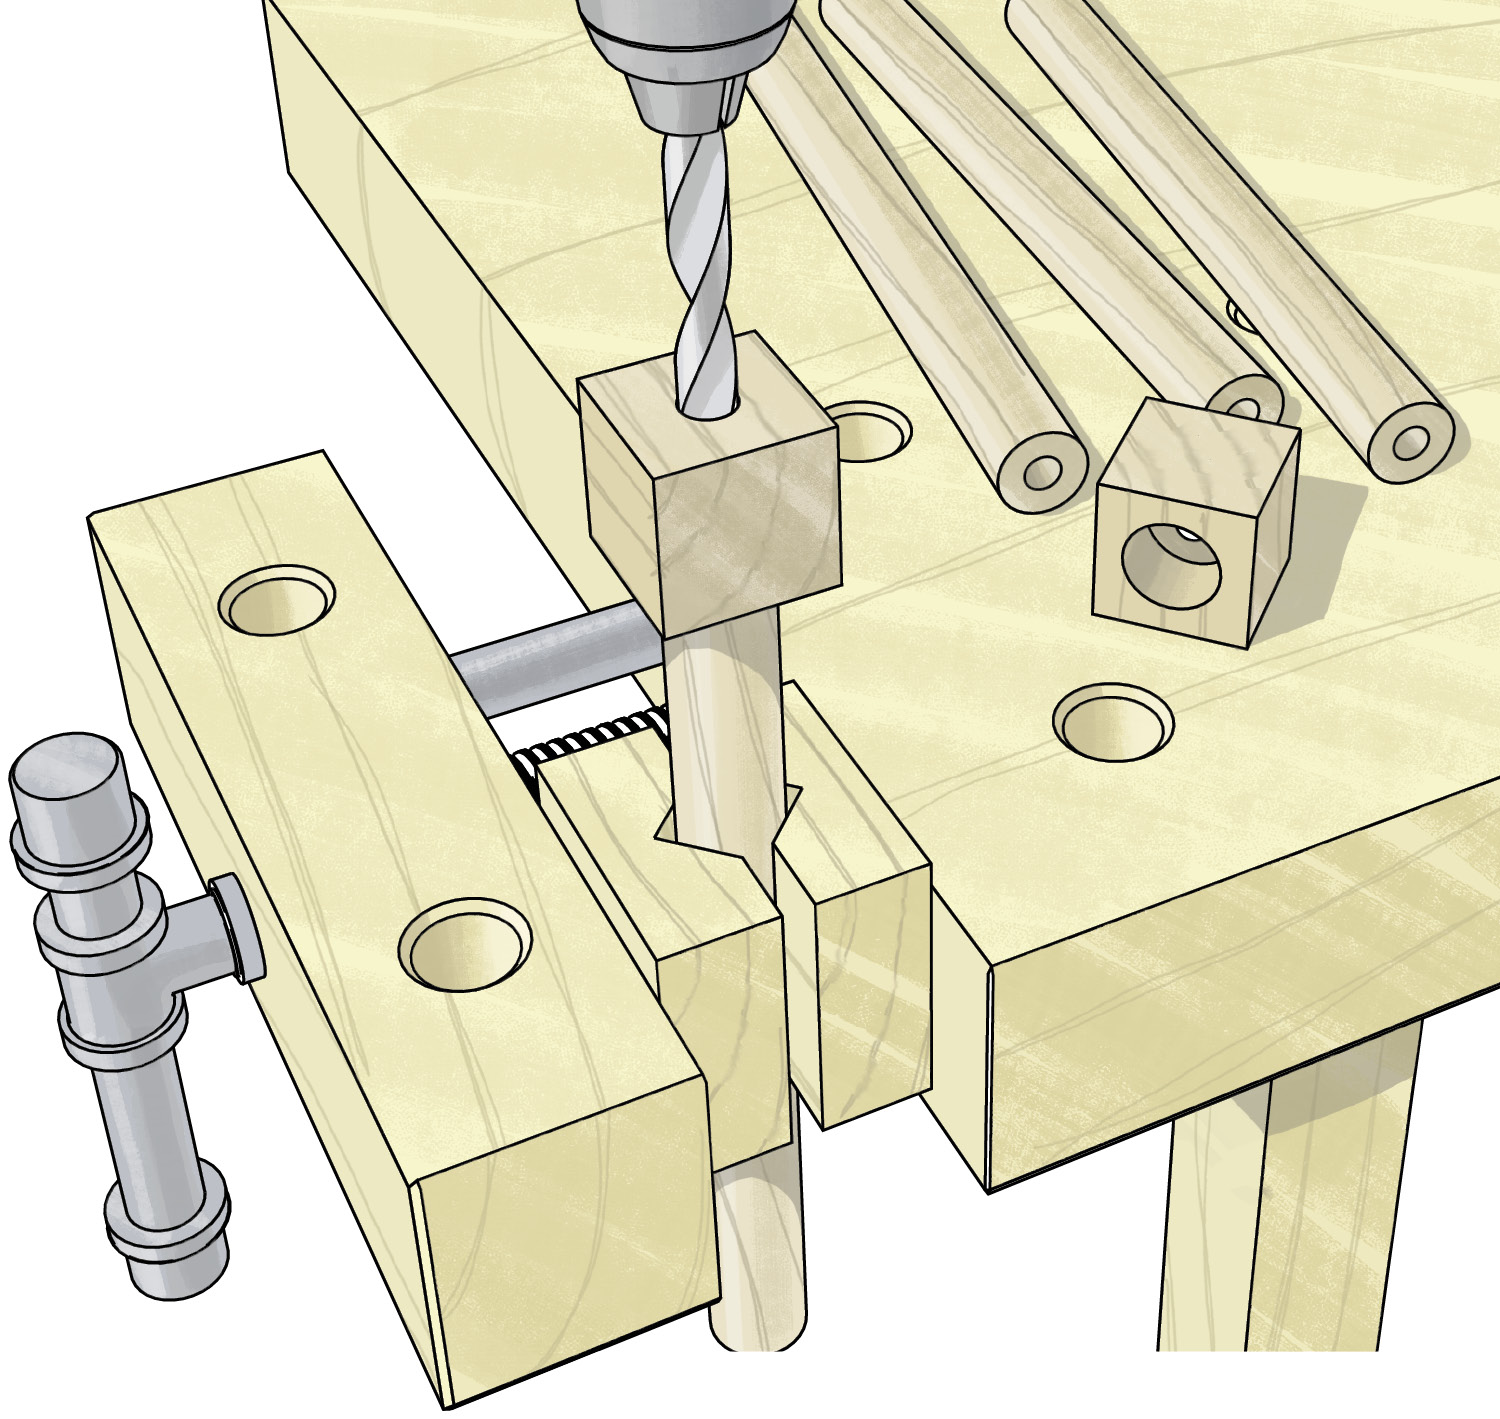 Drawing of dowel drilling in bench clamp